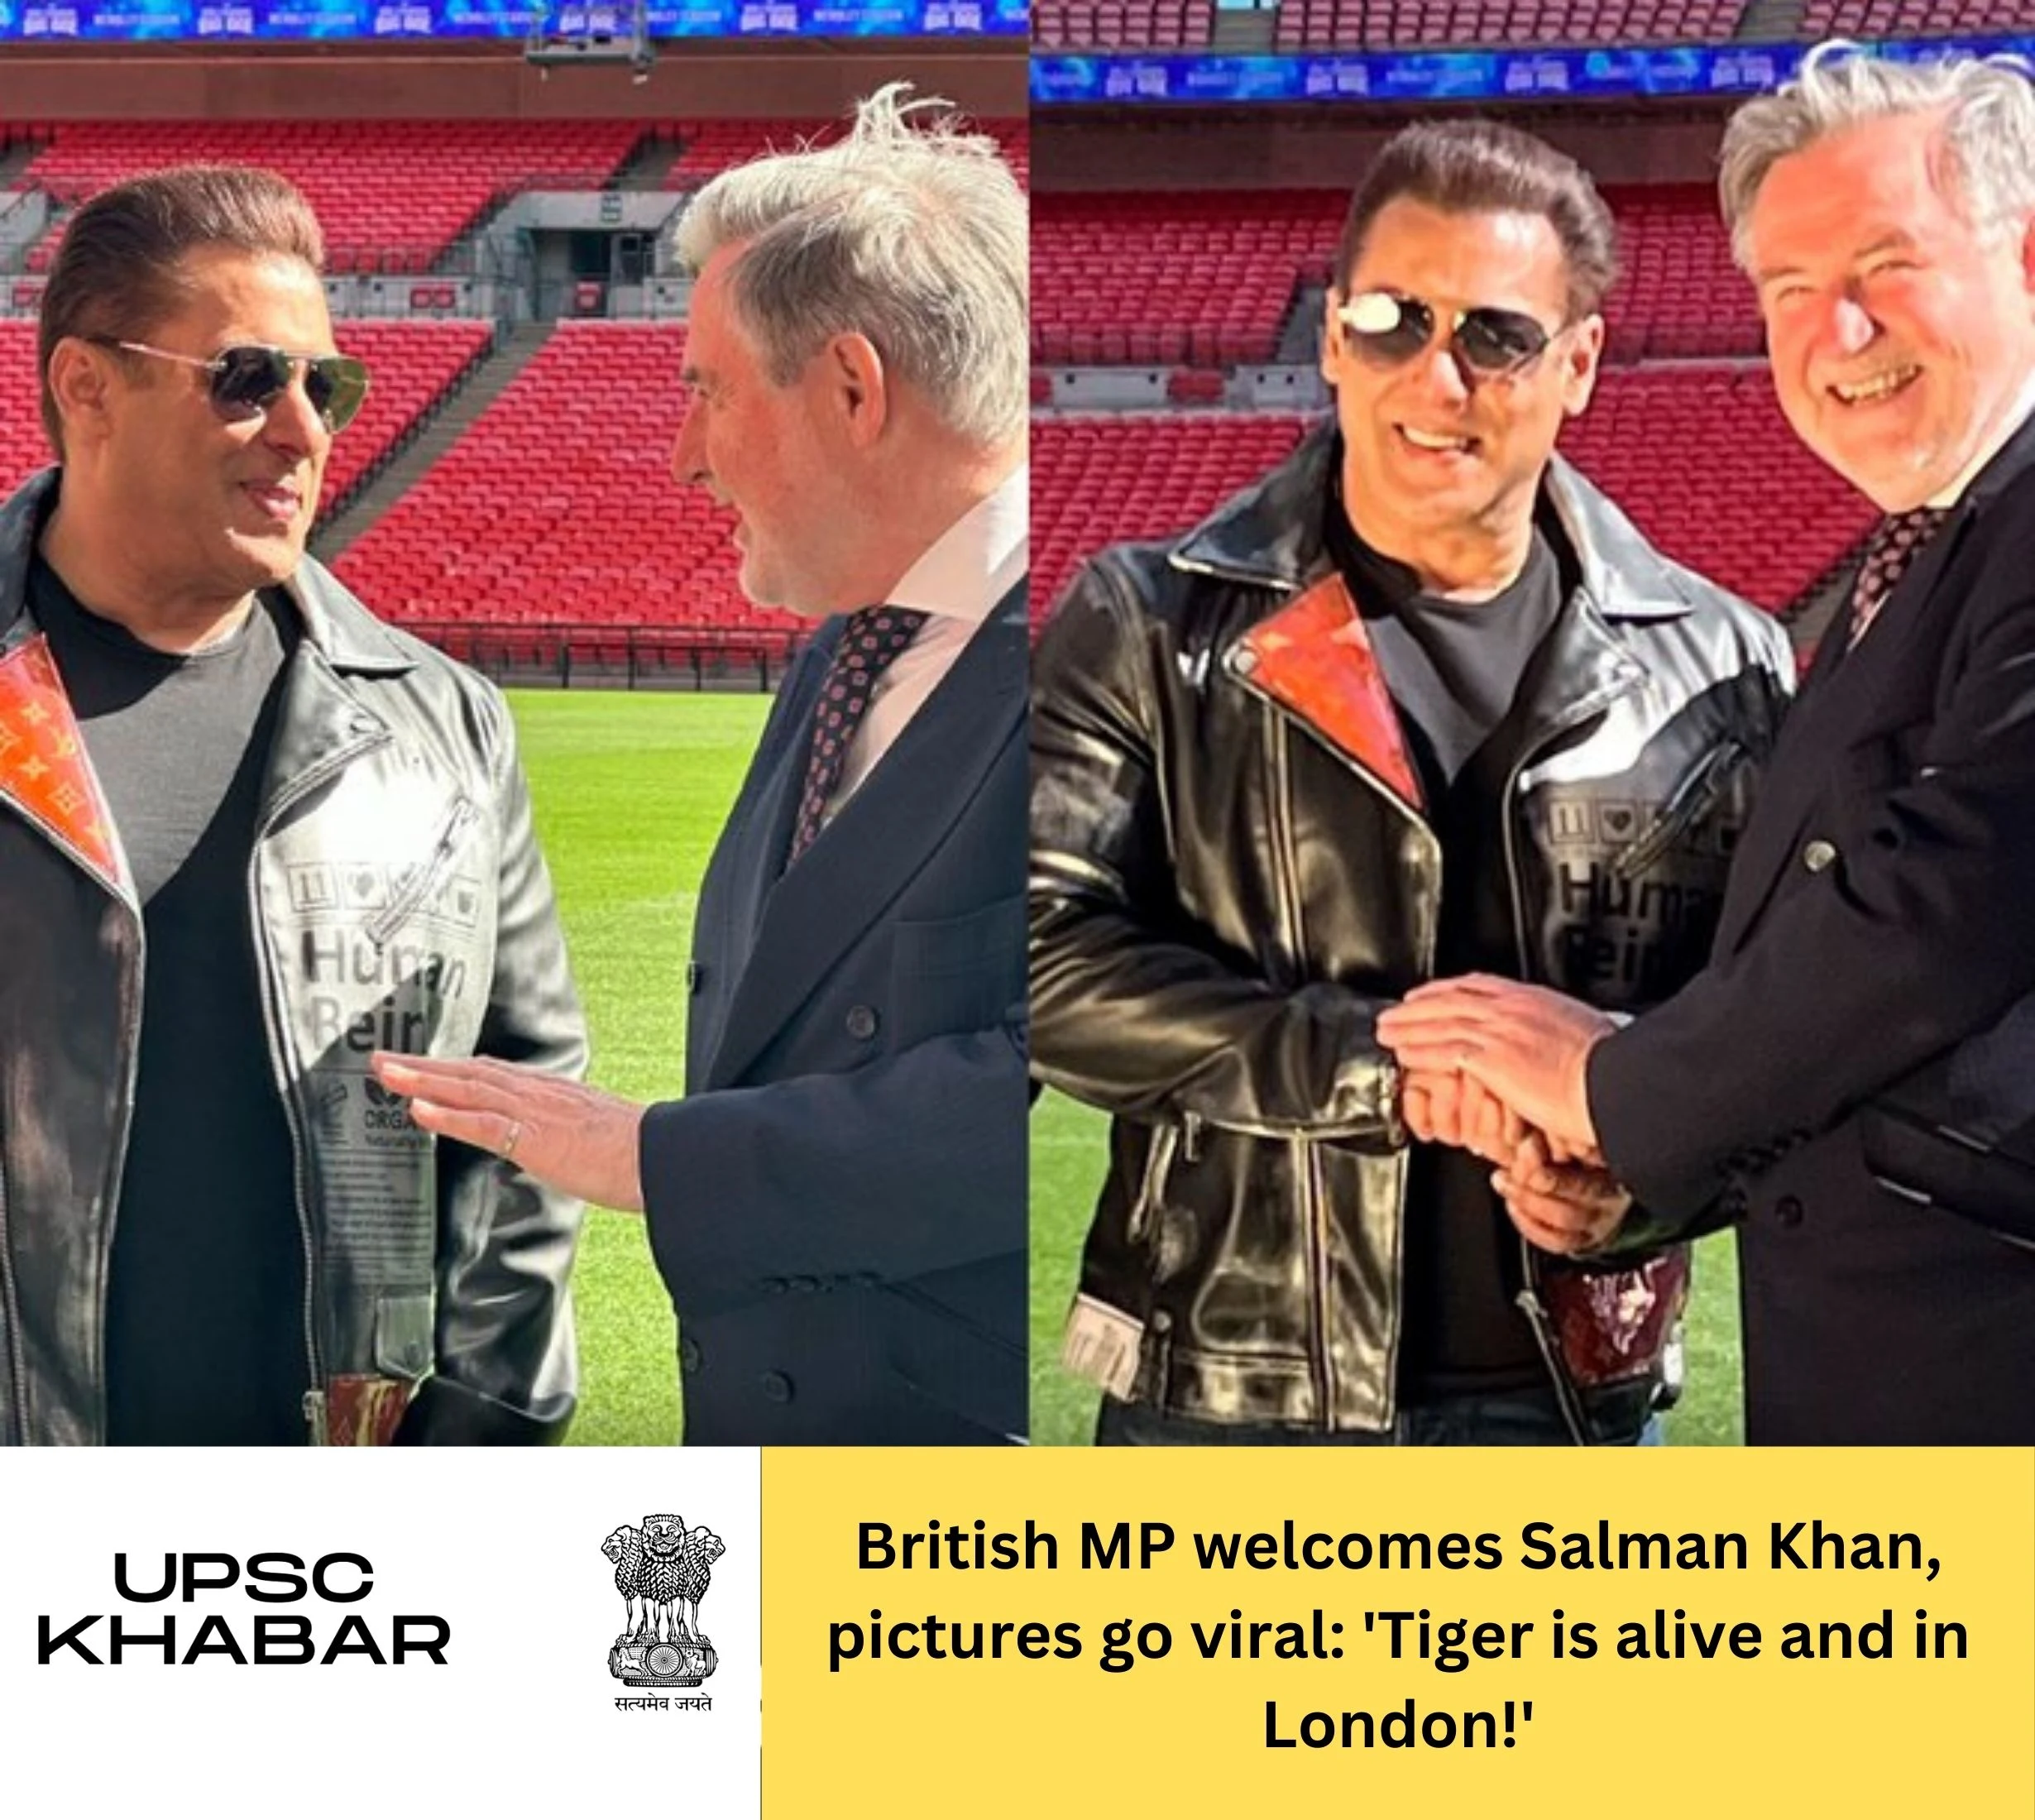 British MP welcomes Salman Khan, pictures go viral: 'Tiger is alive and in London!'